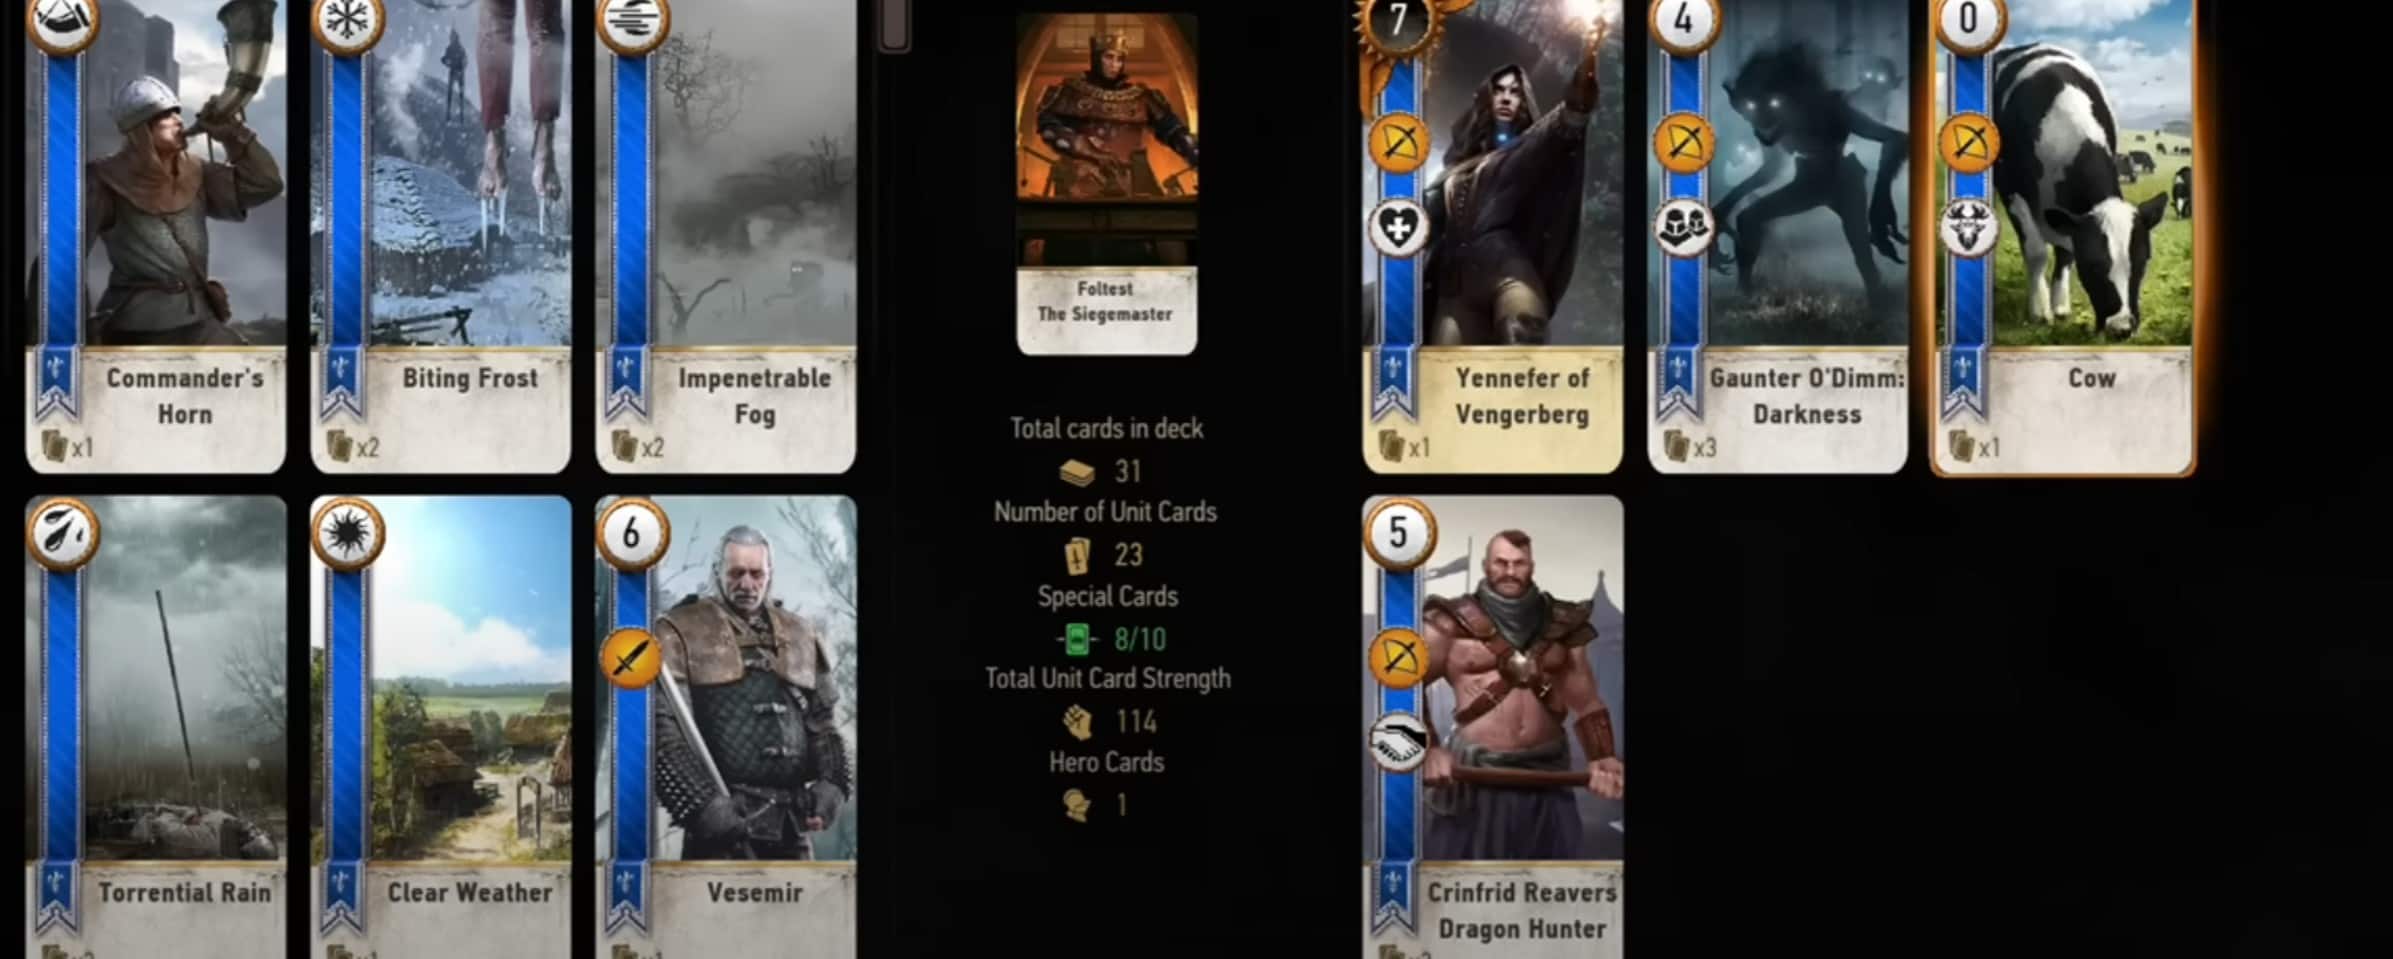 The Witcher 3 Gwent Cards Locations